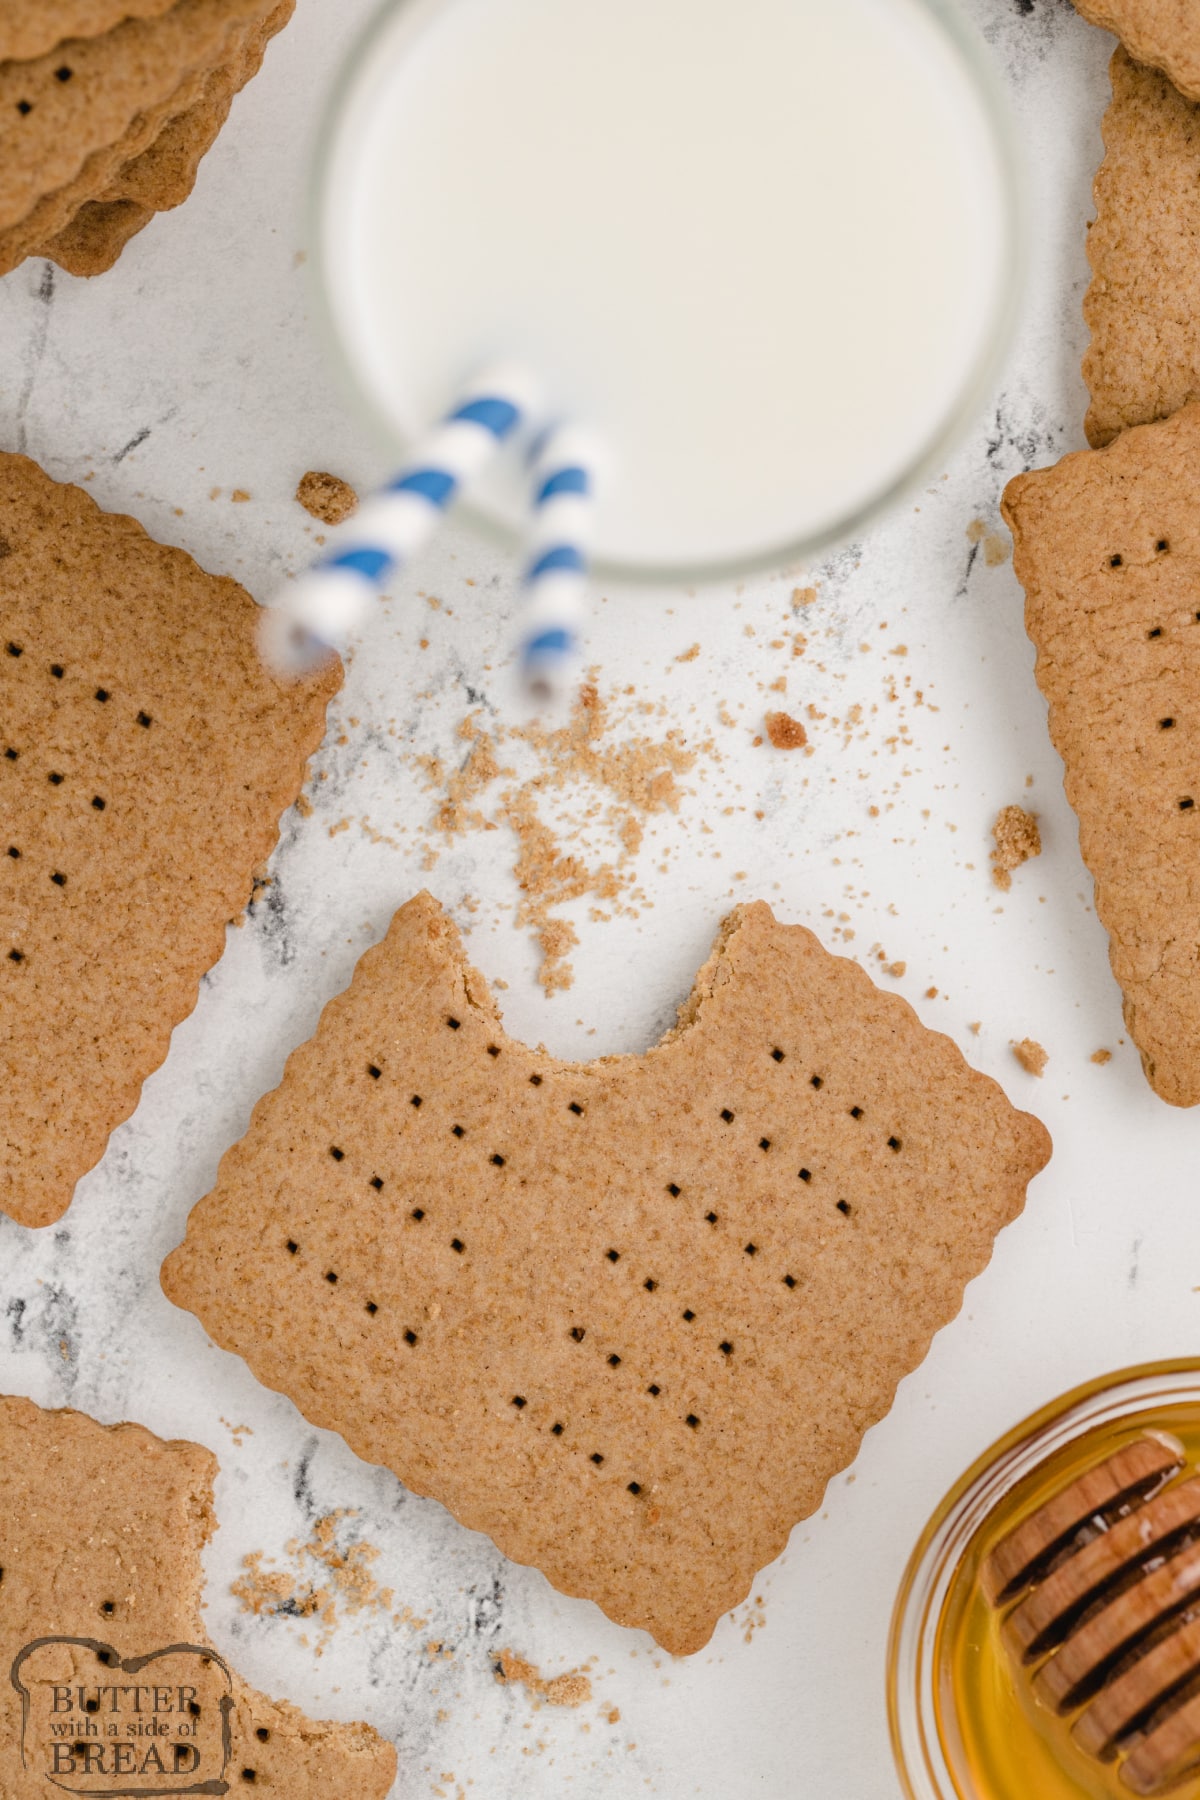 Homemade Graham Crackers are easy to make with a few basic ingredients. These honey graham crackers are made with whole wheat flour and sweetened with honey!